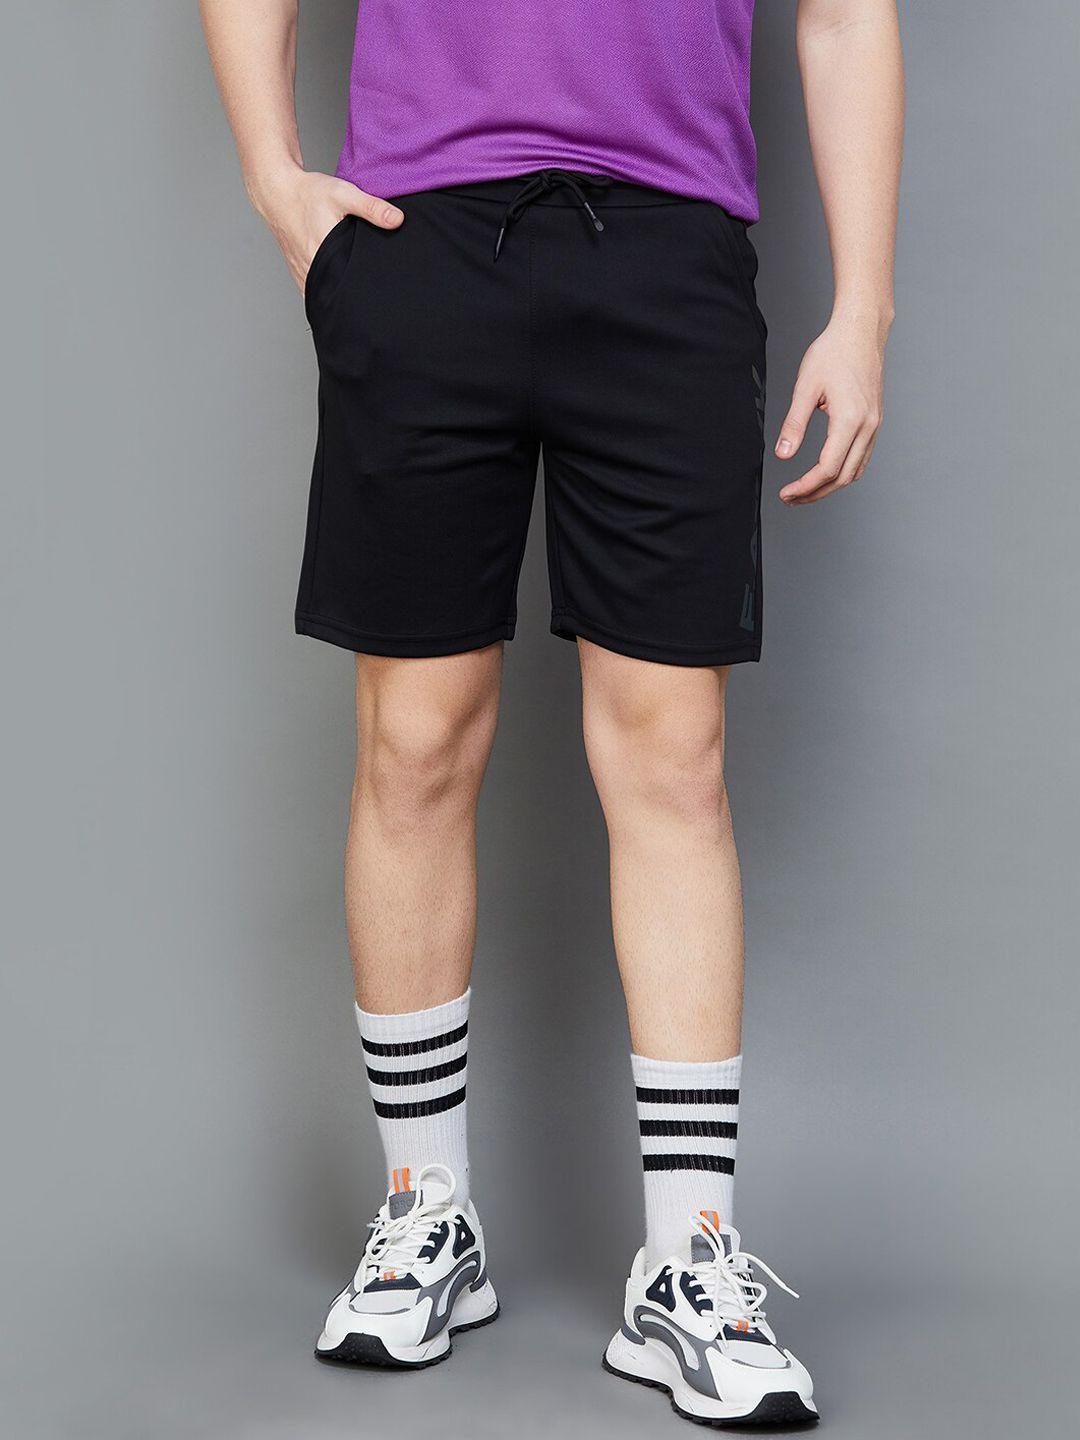 fame-forever-by-lifestyle-men-high-rise-training-or-gym-sports-shorts